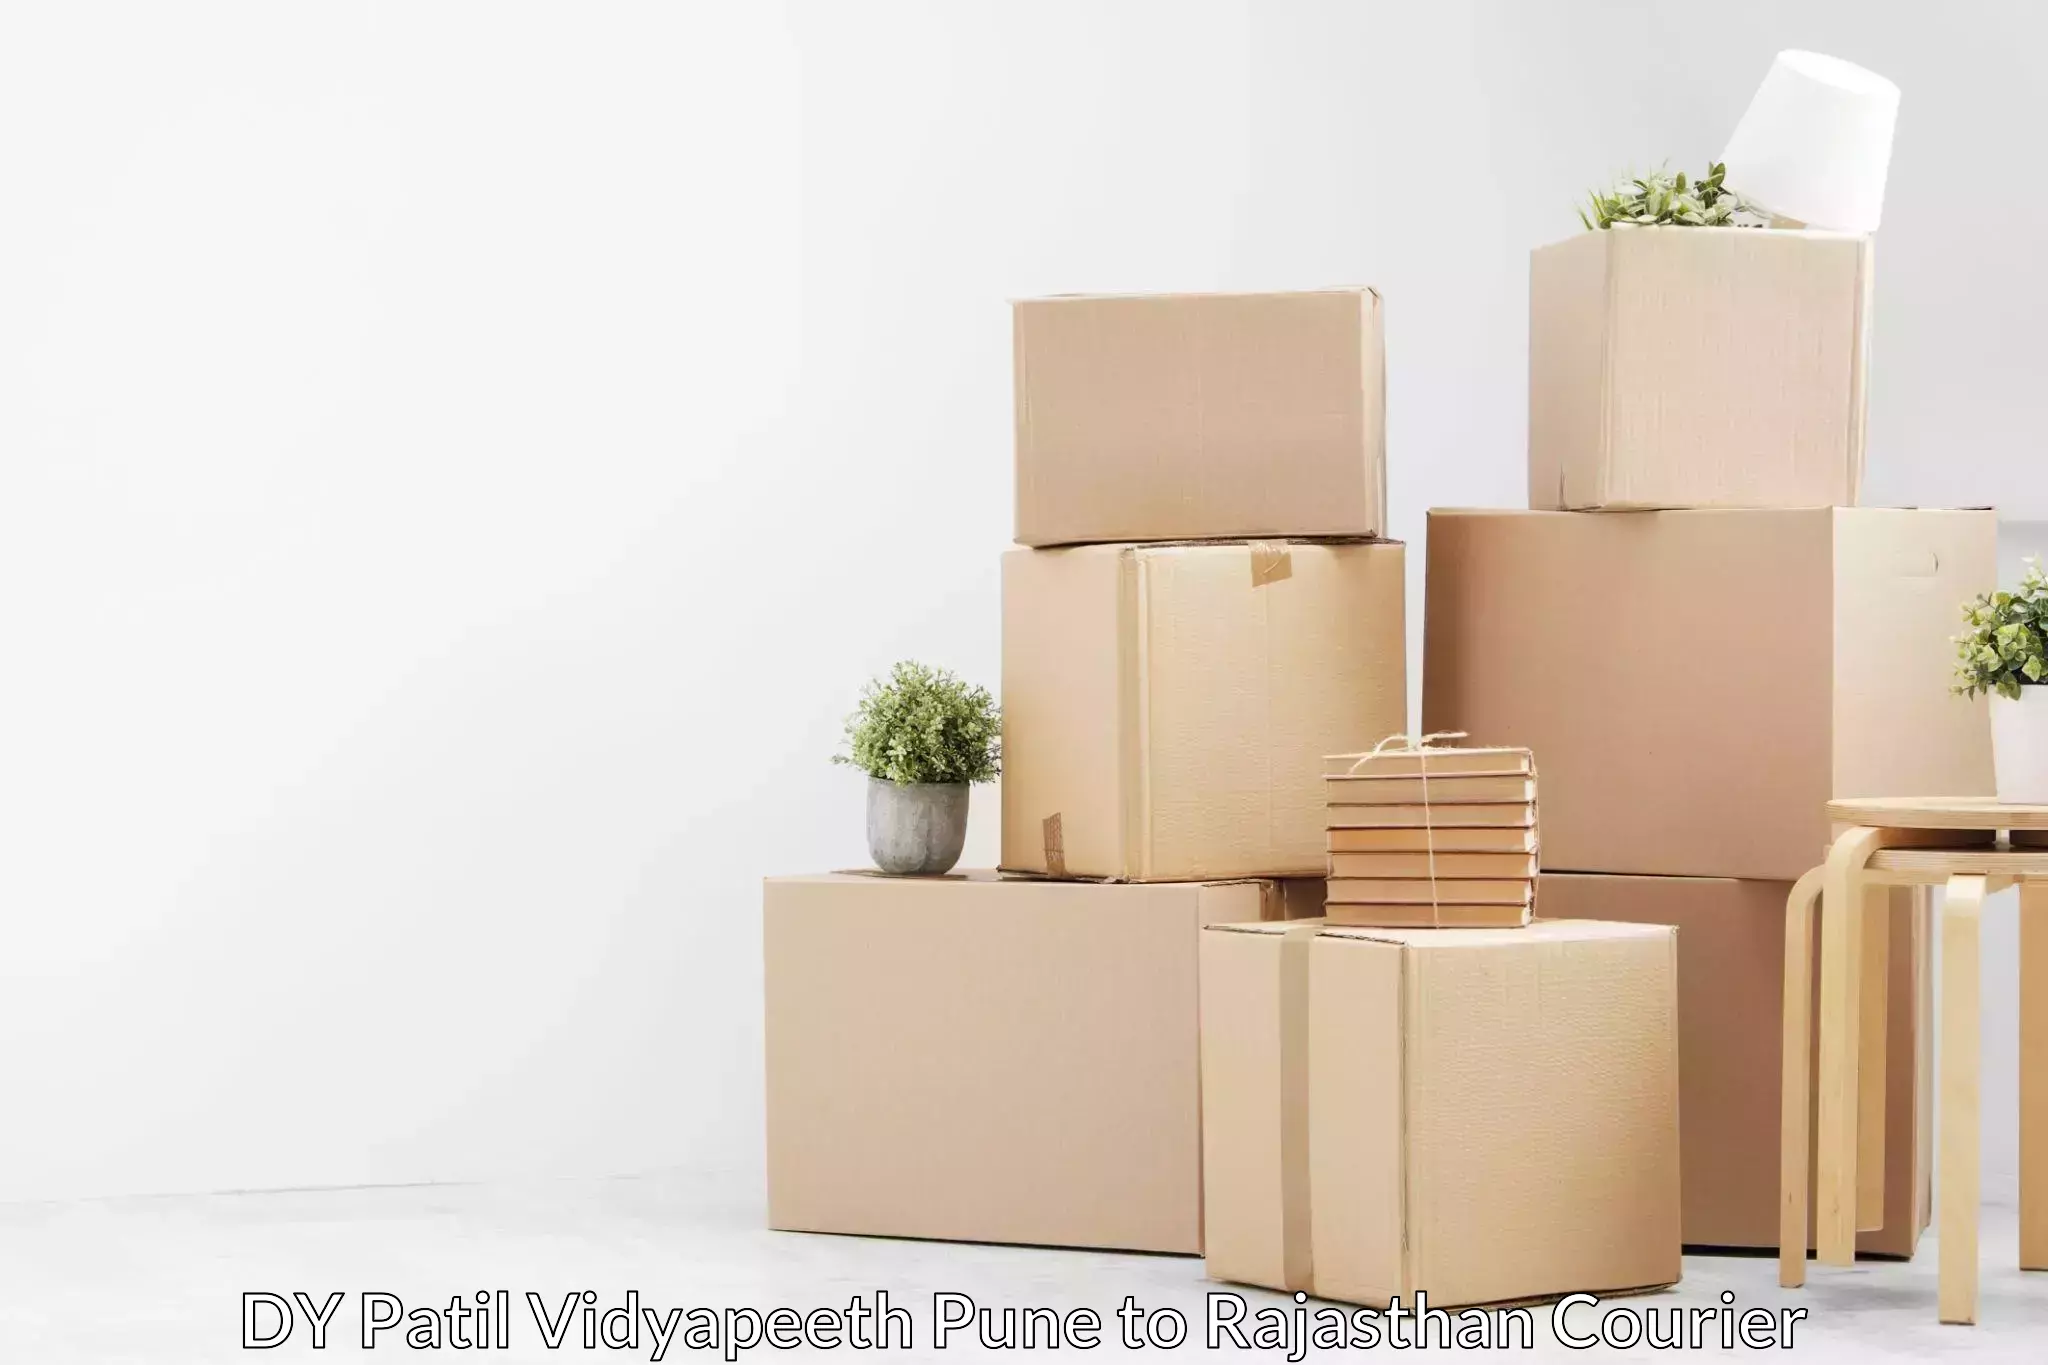 Hassle-free relocation DY Patil Vidyapeeth Pune to NIT Jaipur